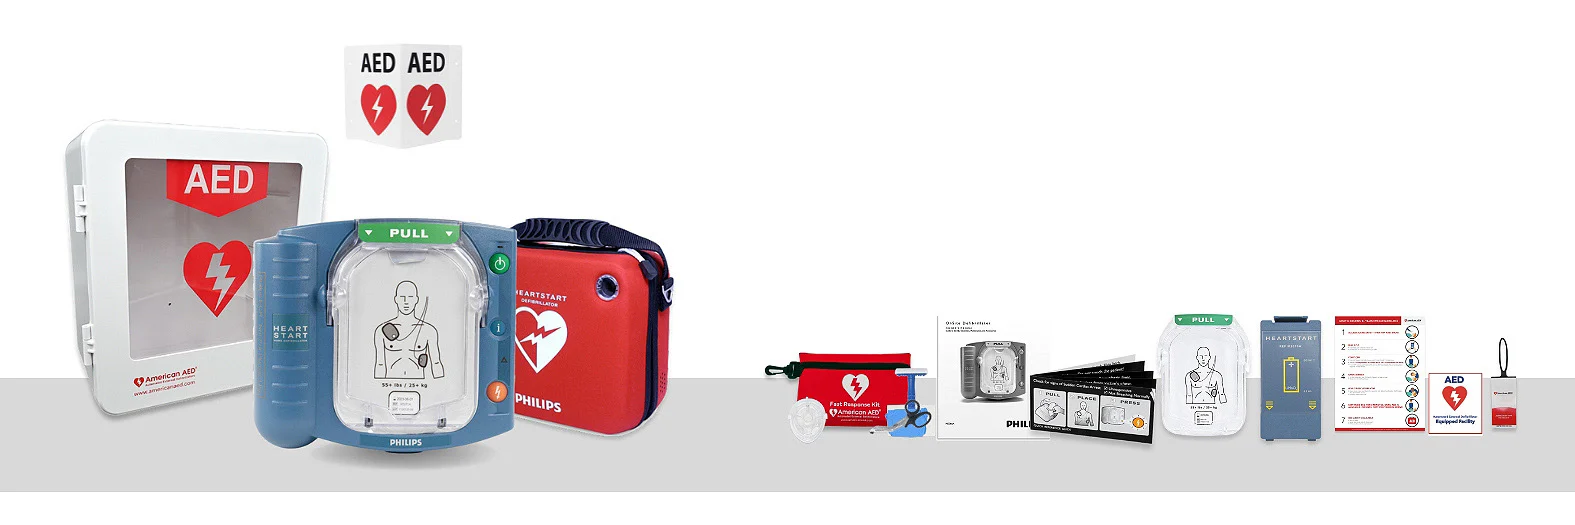 Banner showing an AED kit and its contents